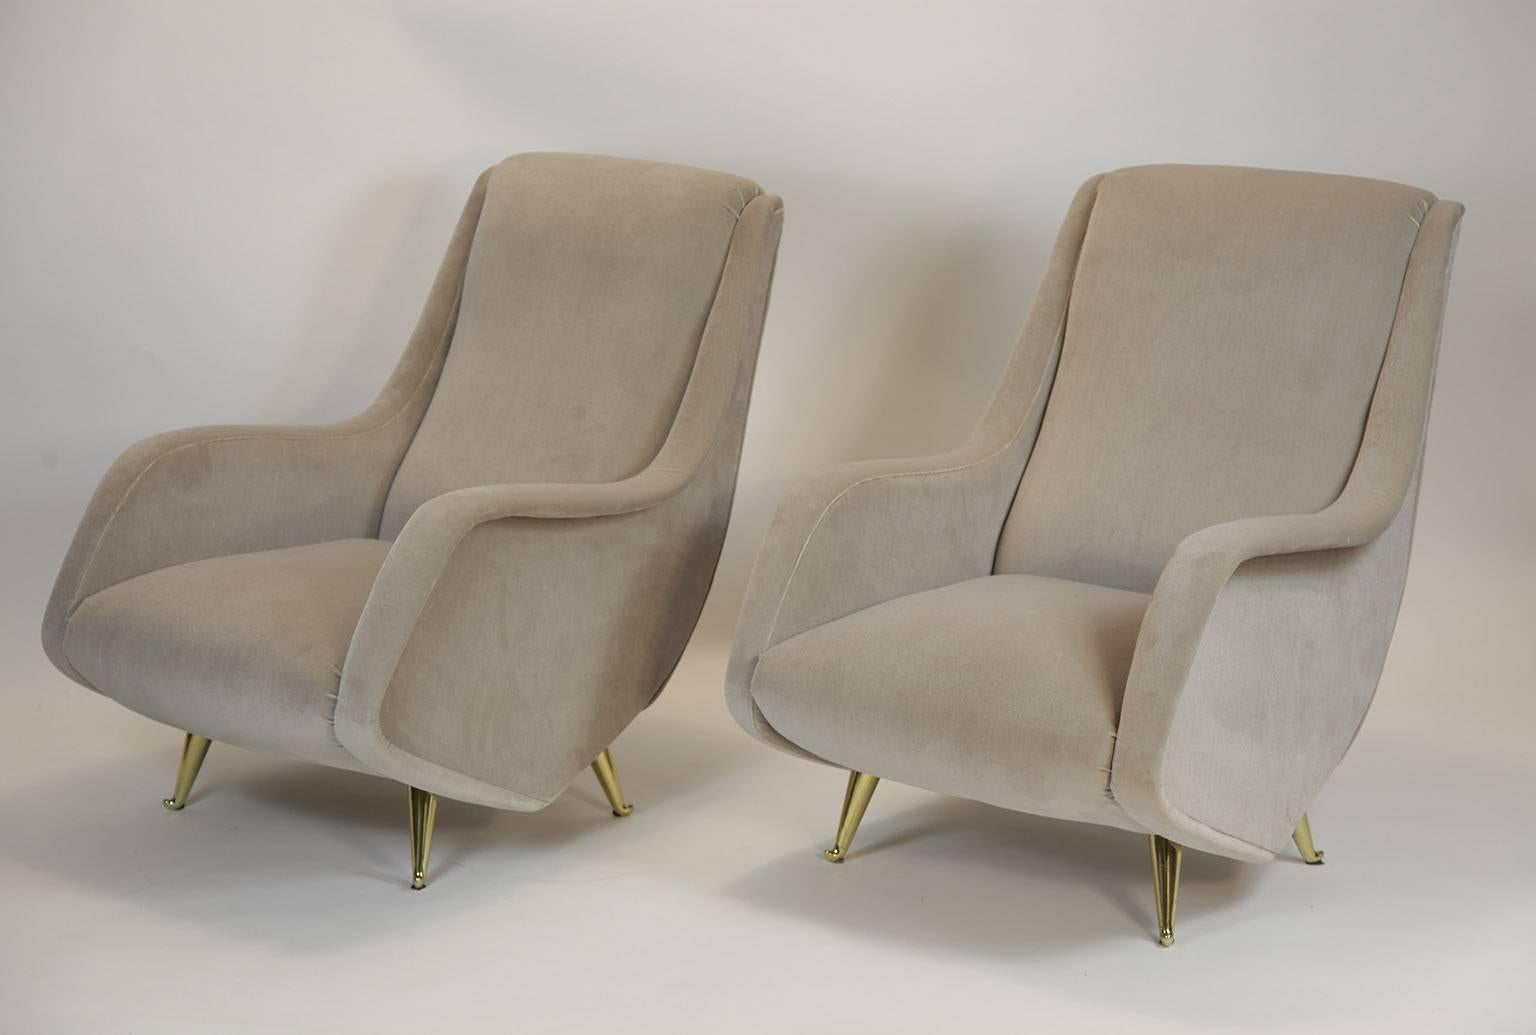 Charming and comfortable armchairs.
Velvet upholstery in elegant light grey /dove color; rounded brass feet. 
Totaly restored with Italian cotton velvet.